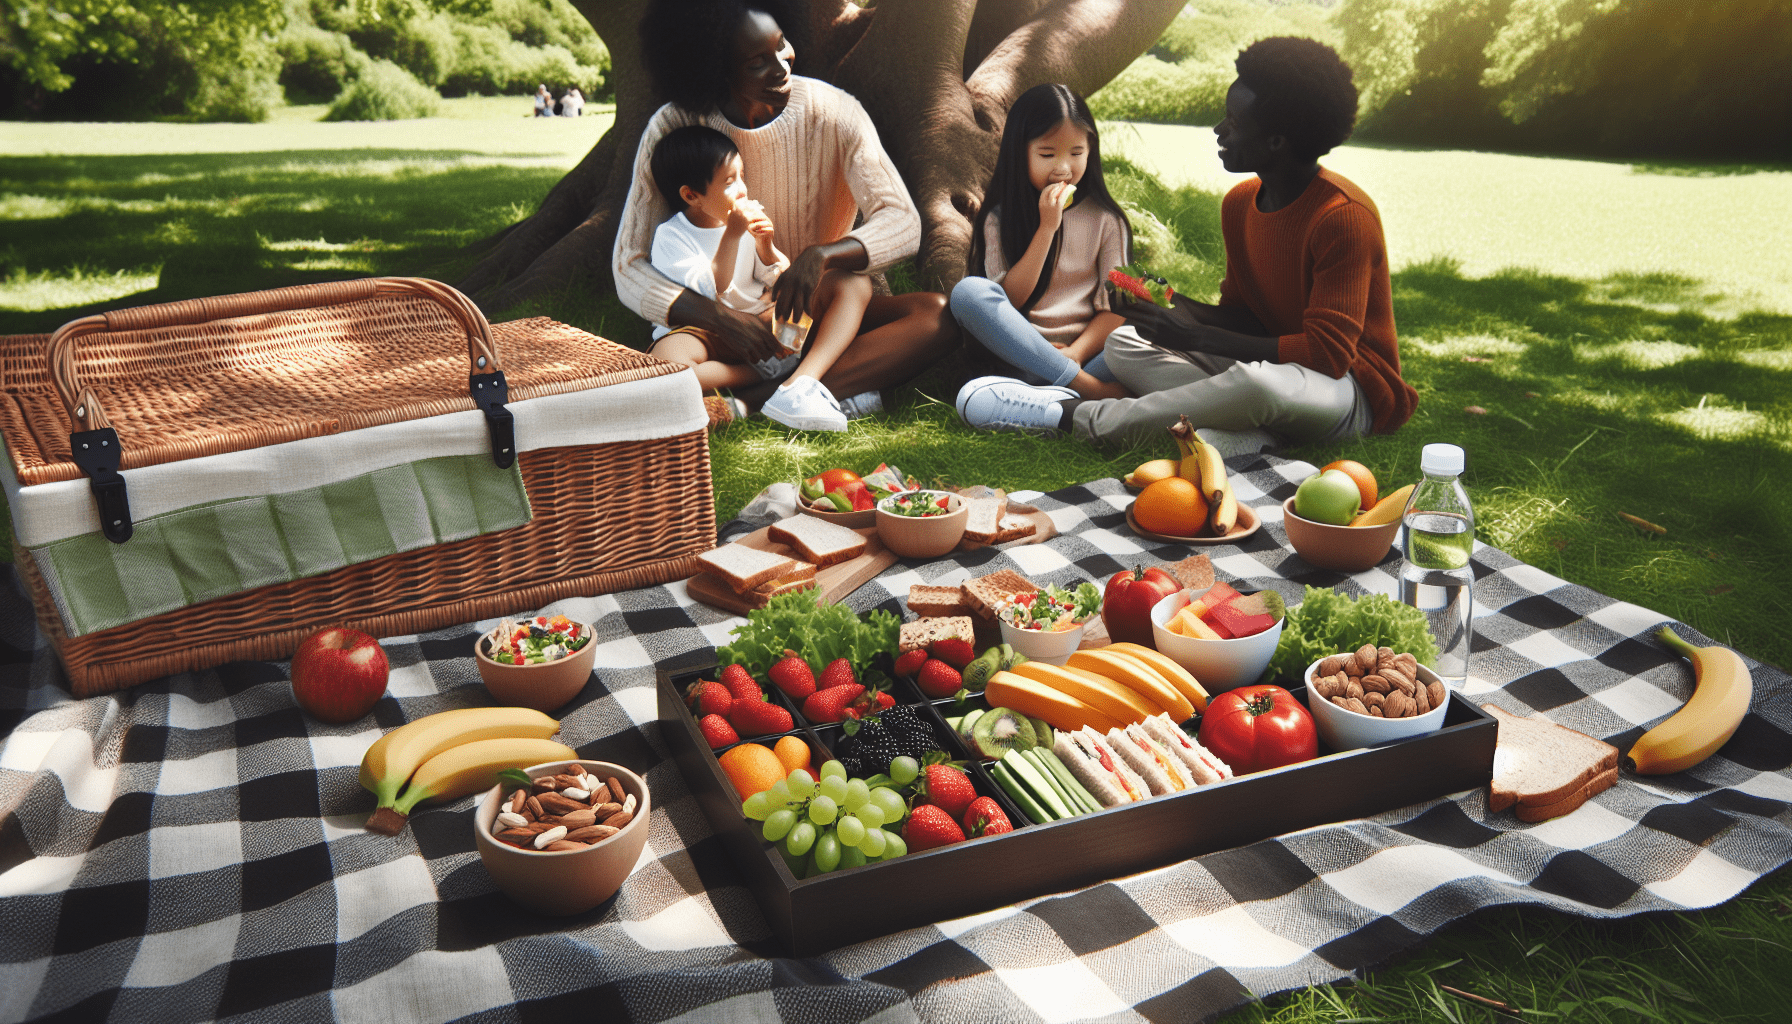 What Are Some Healthy Snacks I Can Eat While At A Picnic?